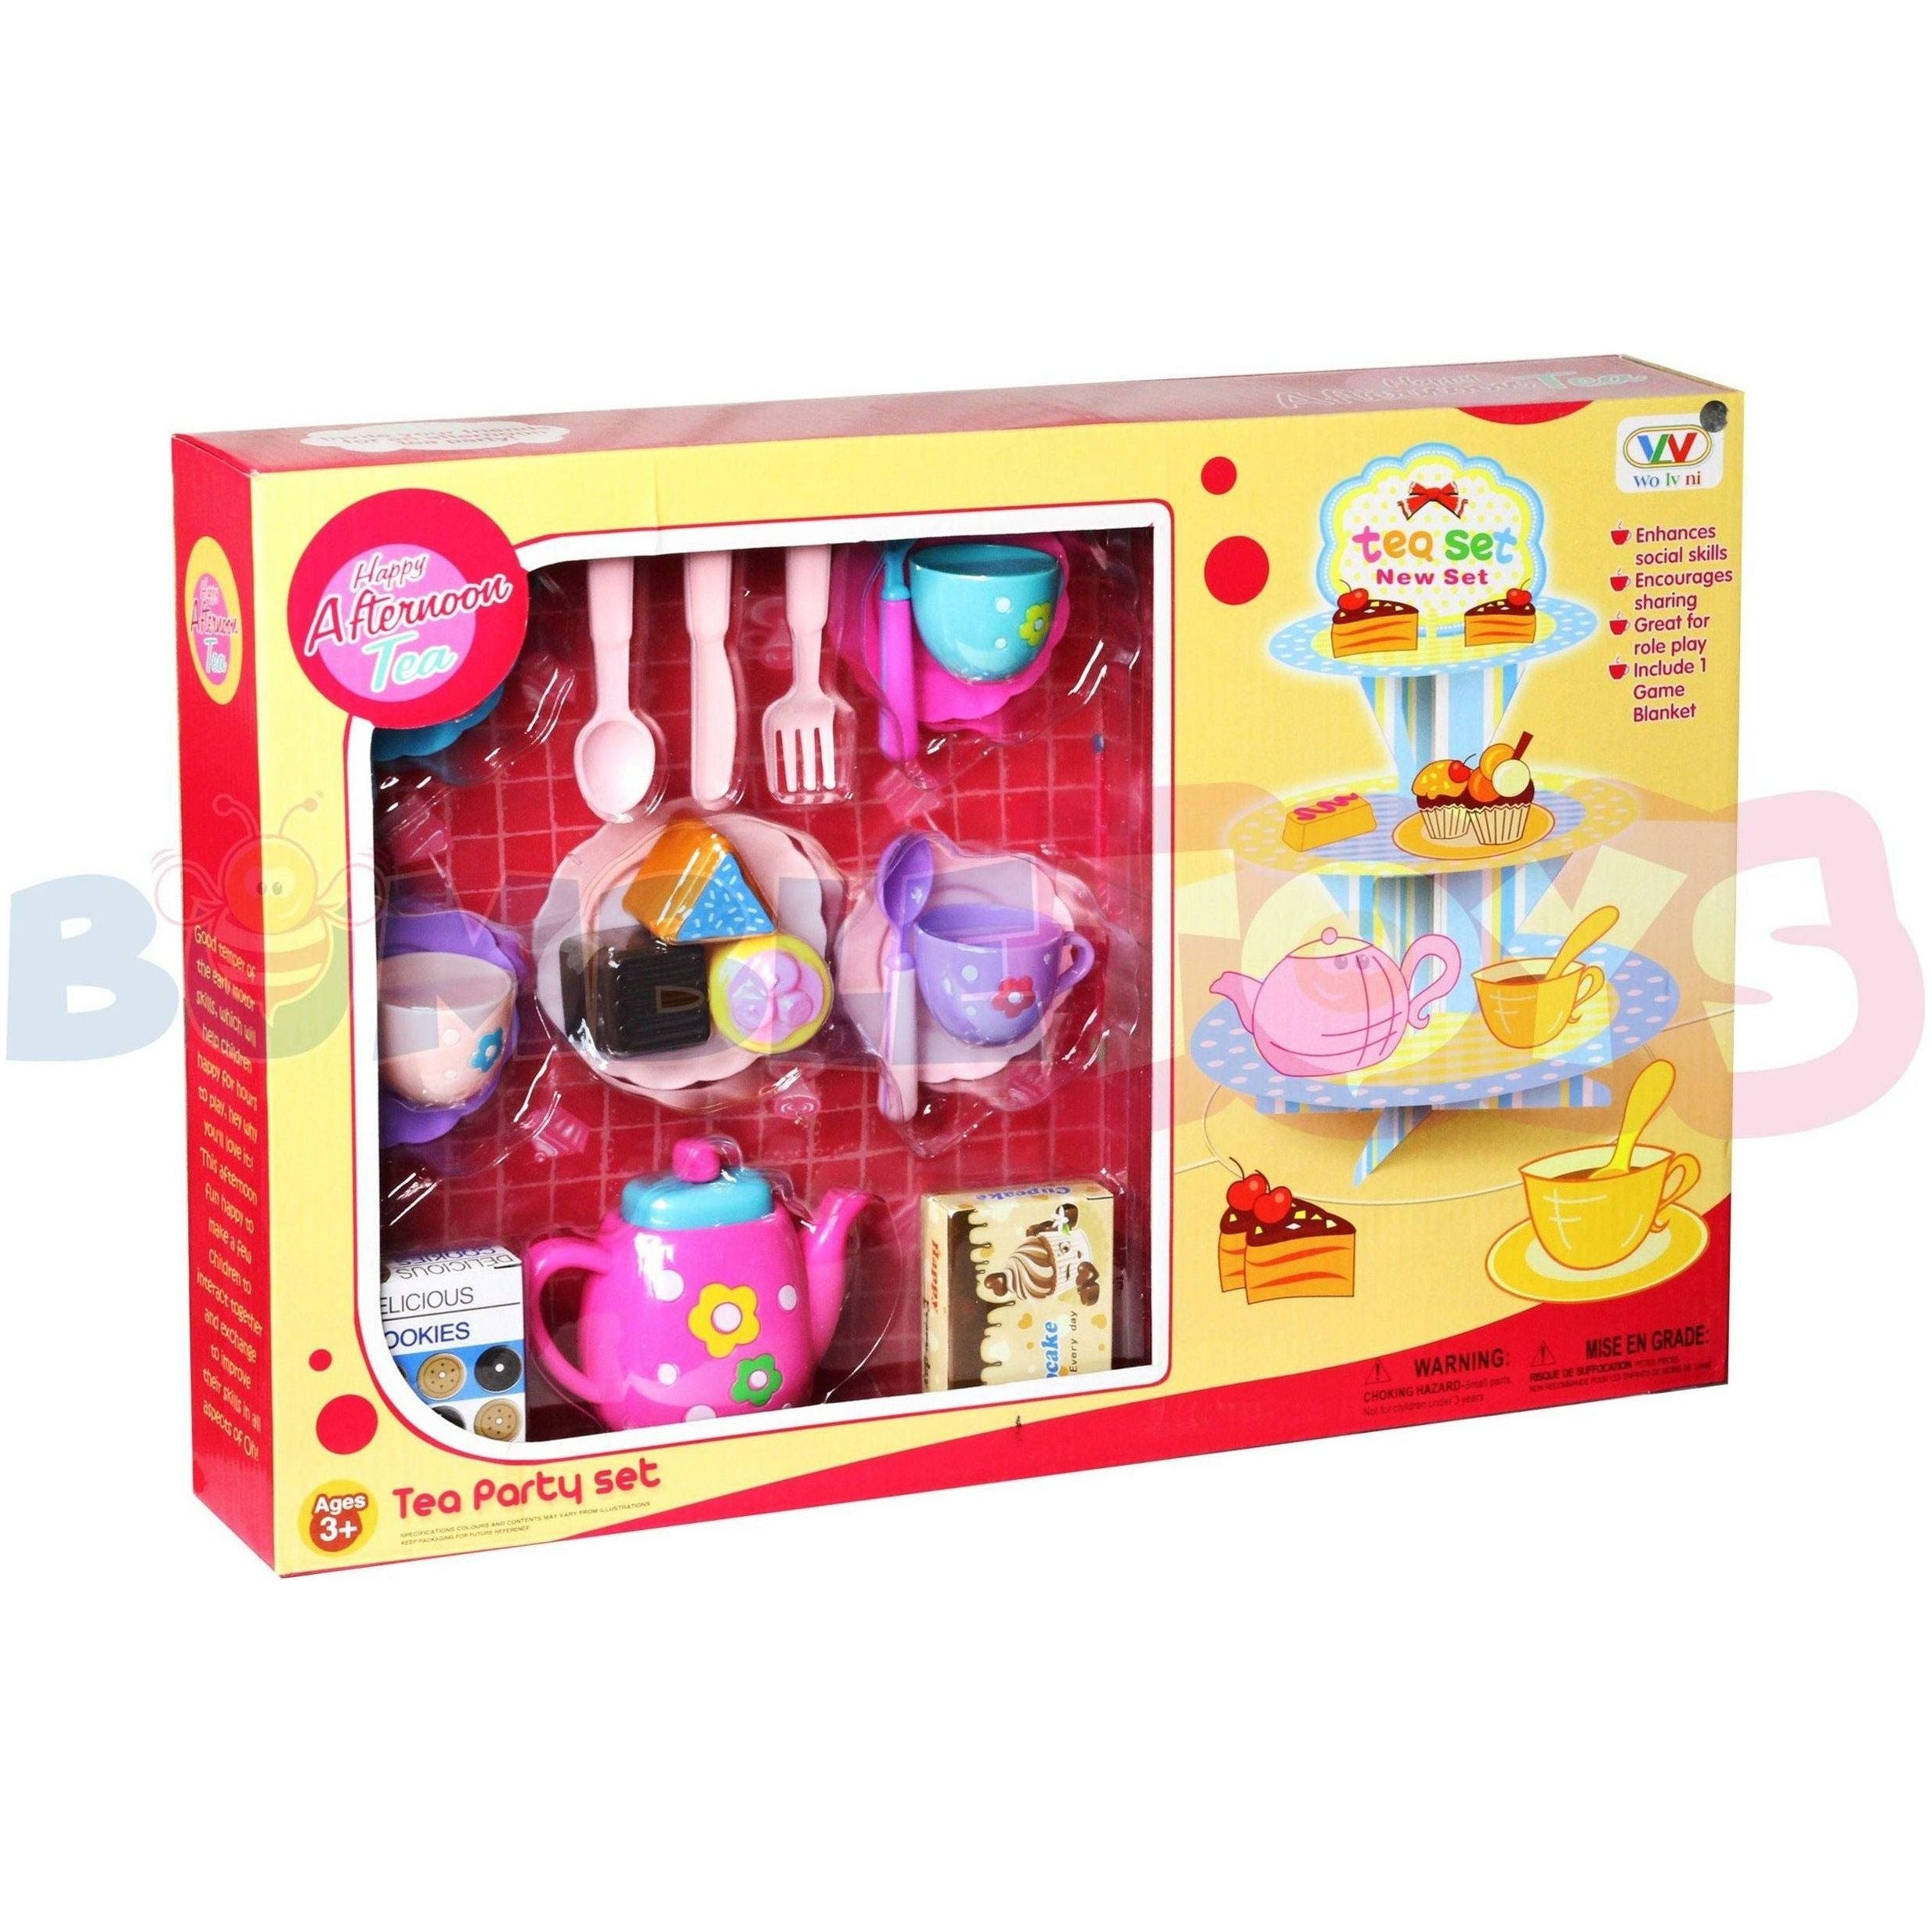 Happy Afternoon Tea Party Play Set for Girls - Small Size - BumbleToys - 5-7 Years, Girls, Roleplay, Toy House